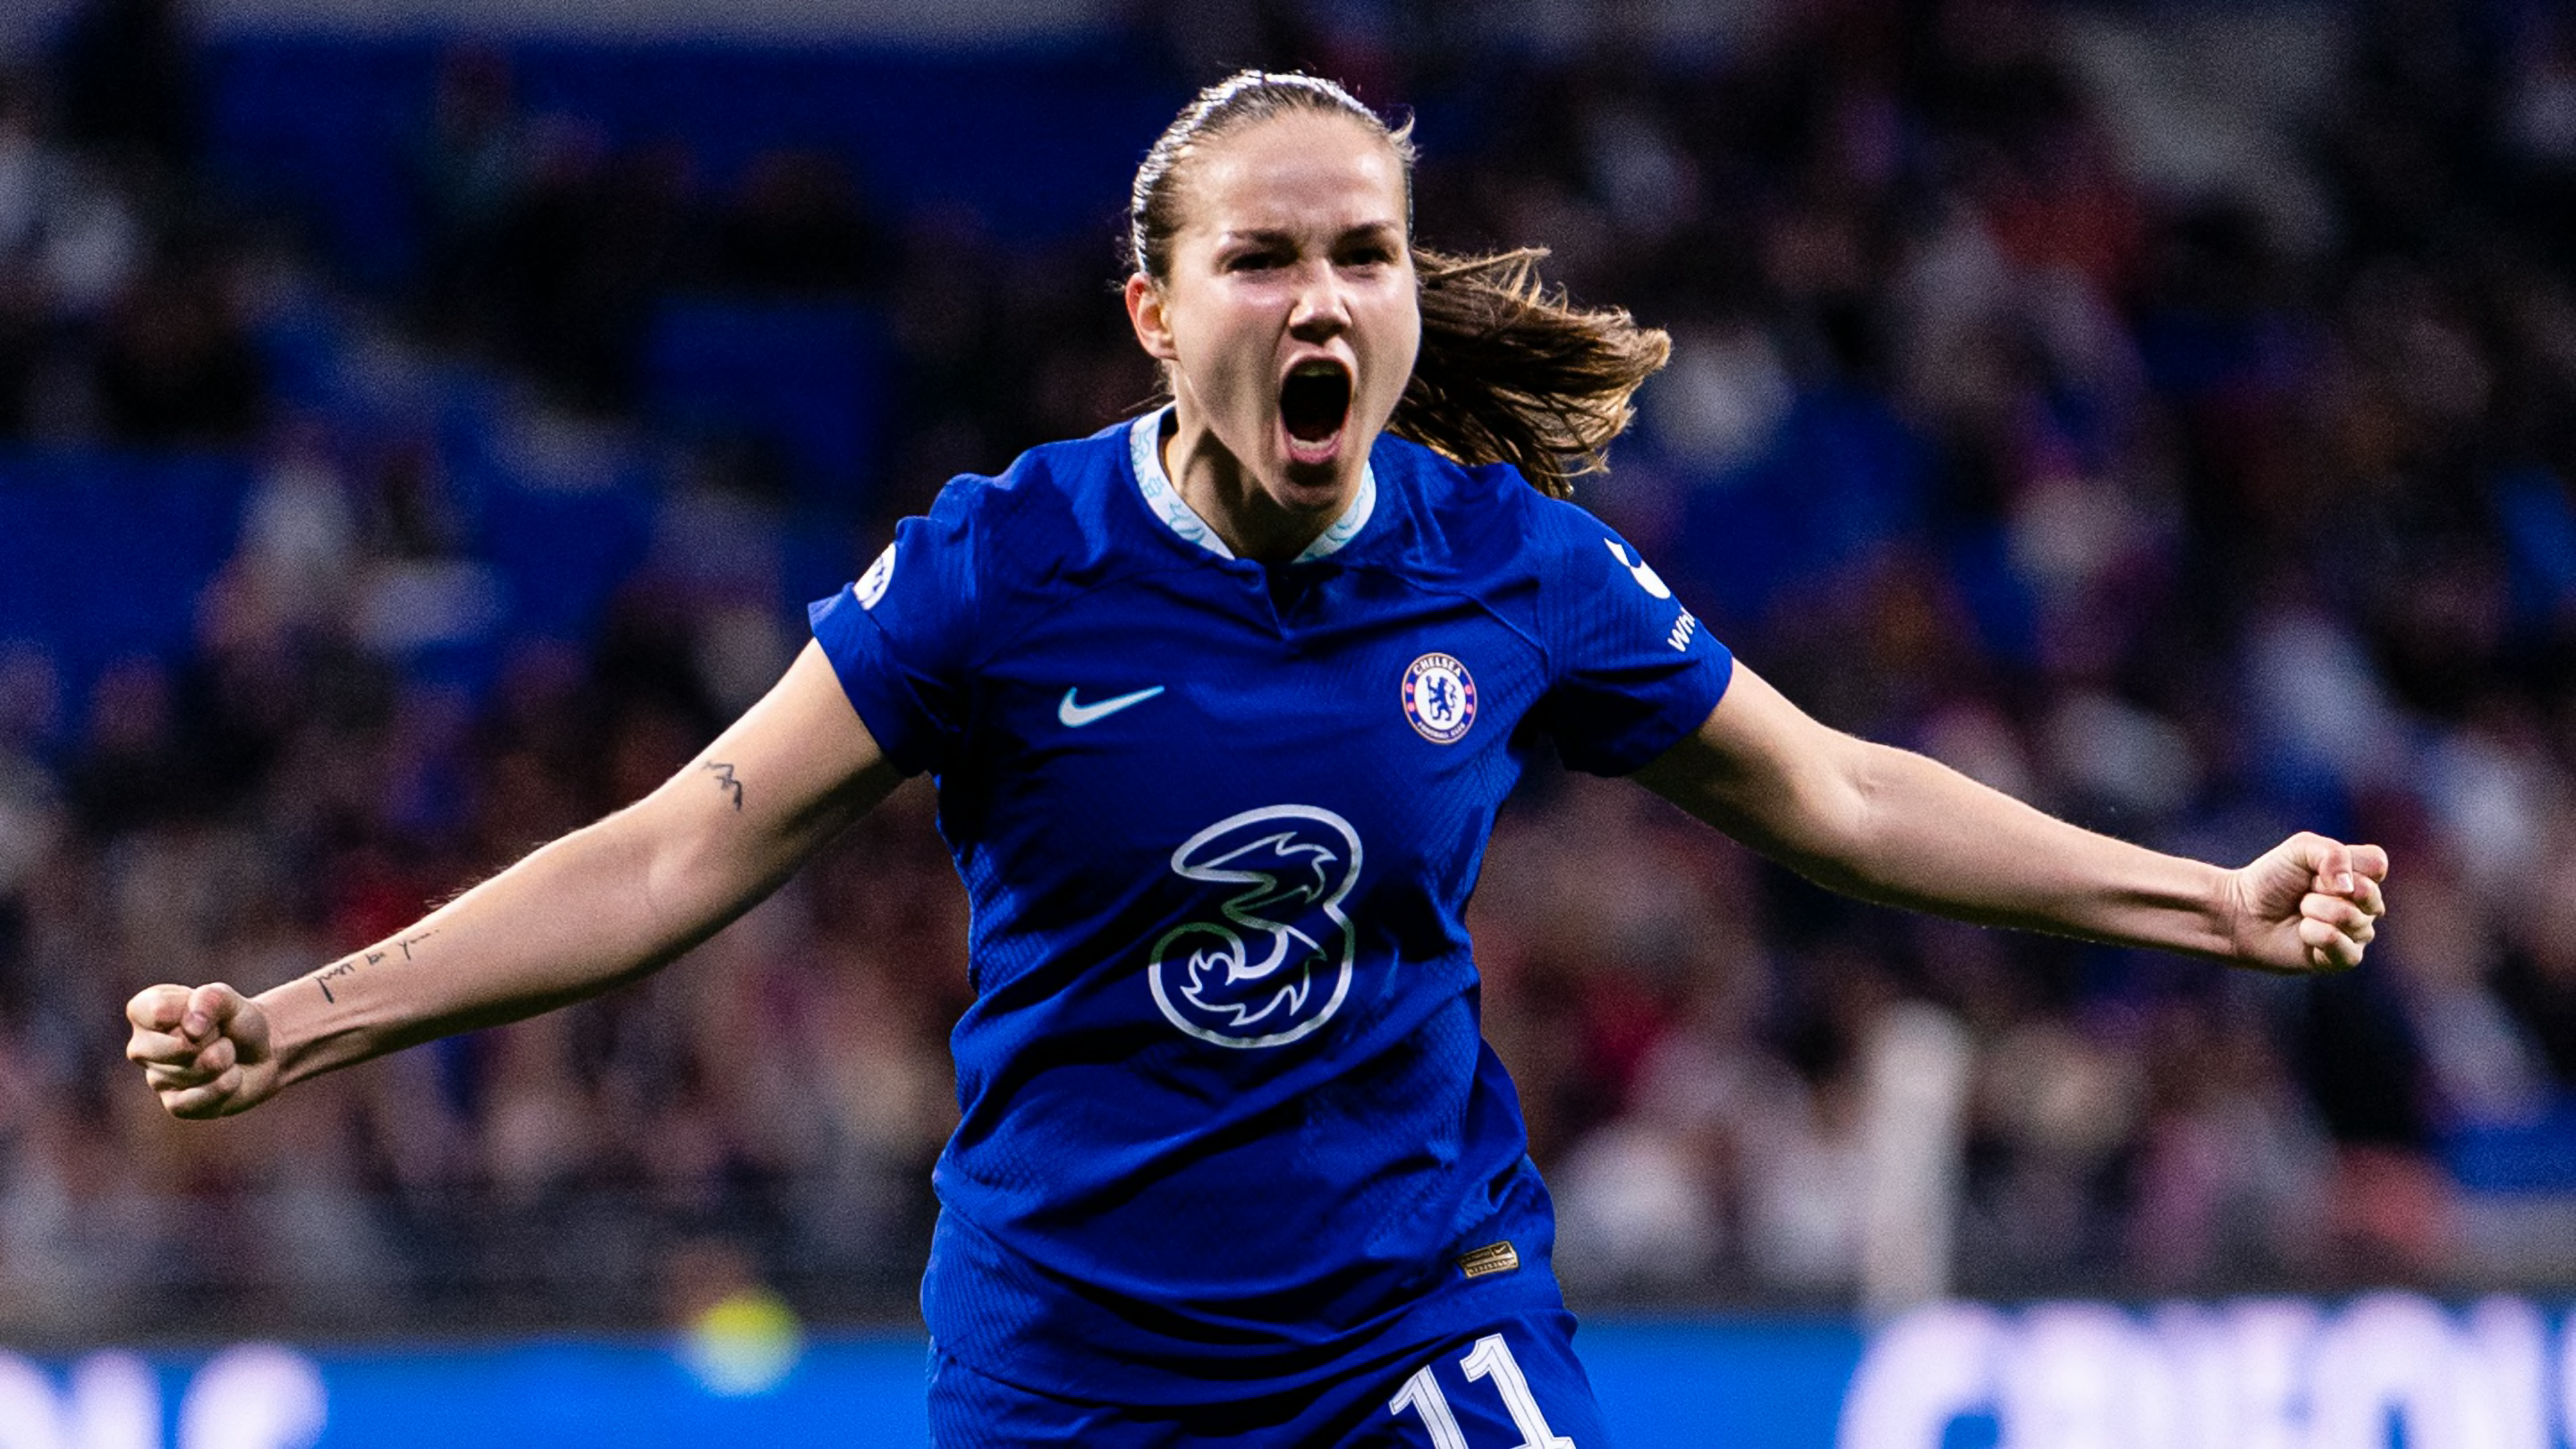 Lyon 0-1 Chelsea: Player ratings as Blues open up slender UWCL aggregate lead